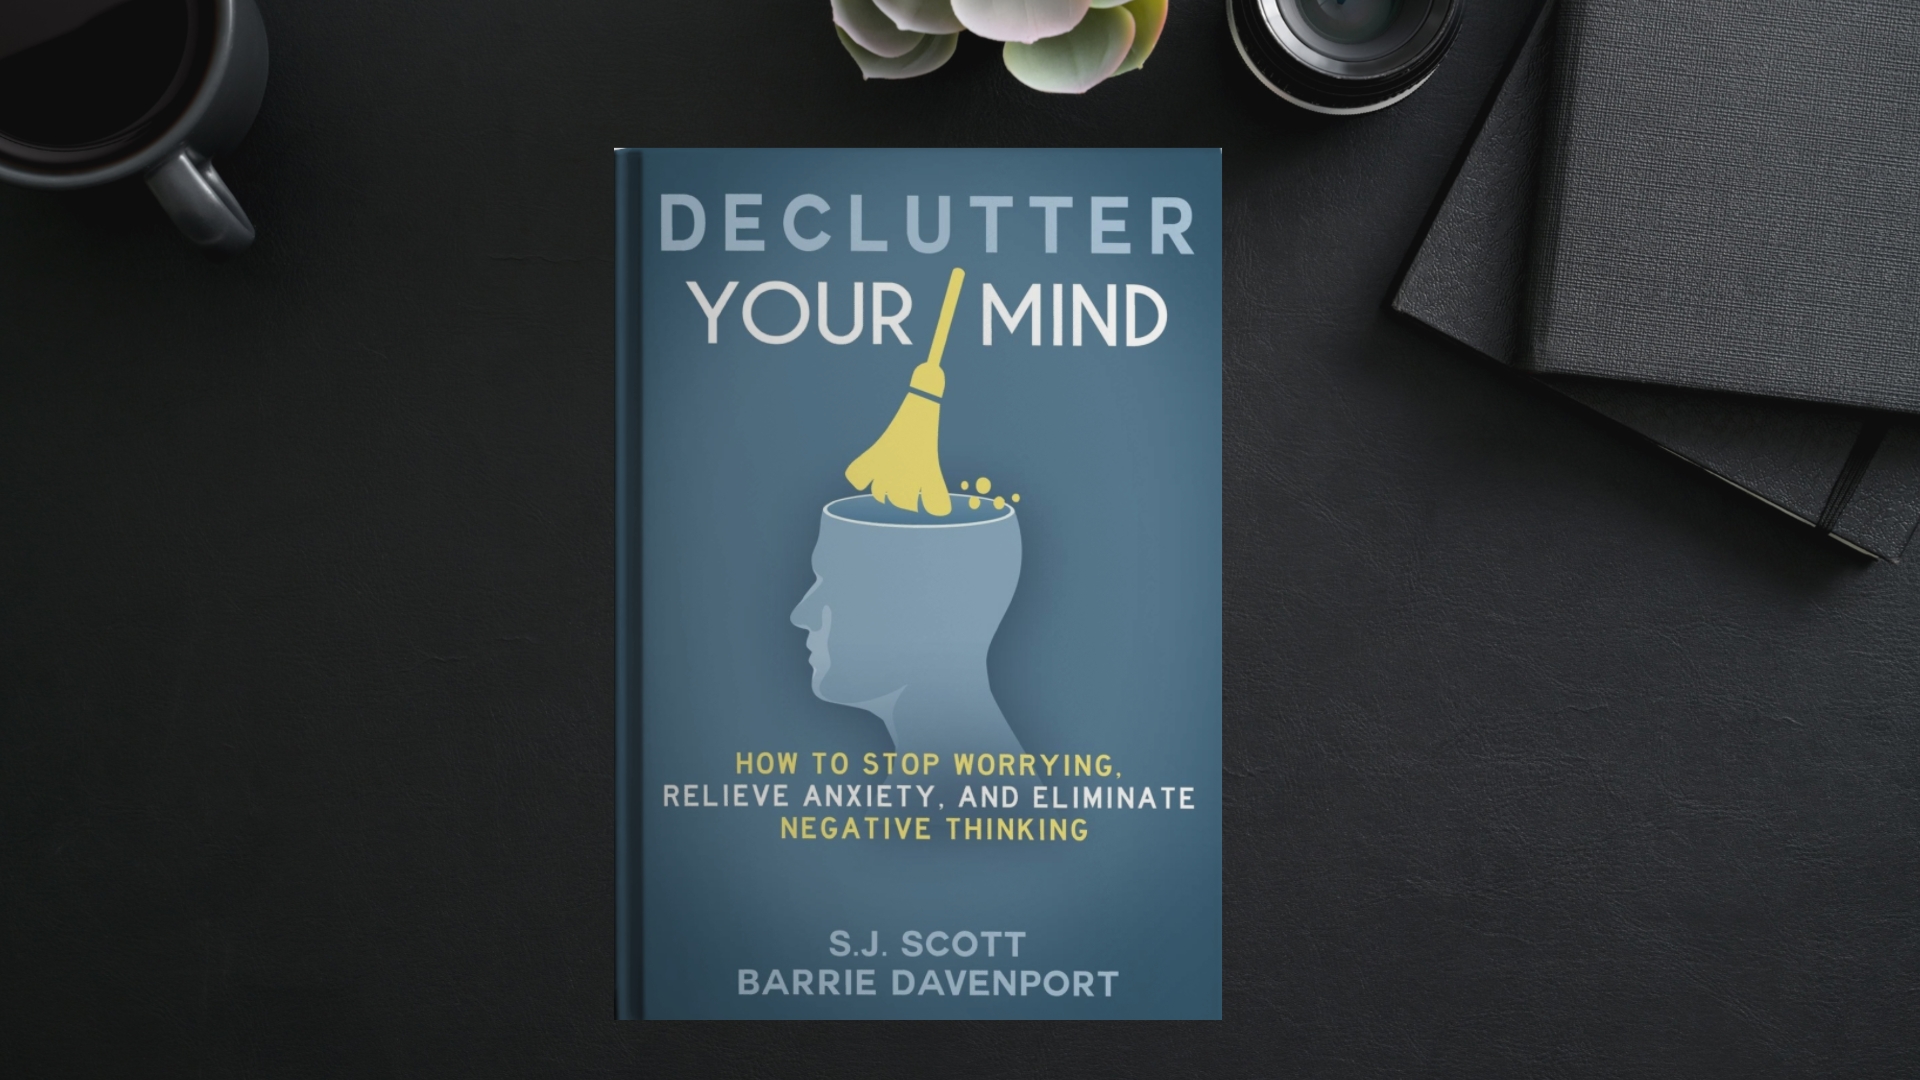 Declutter your mind book